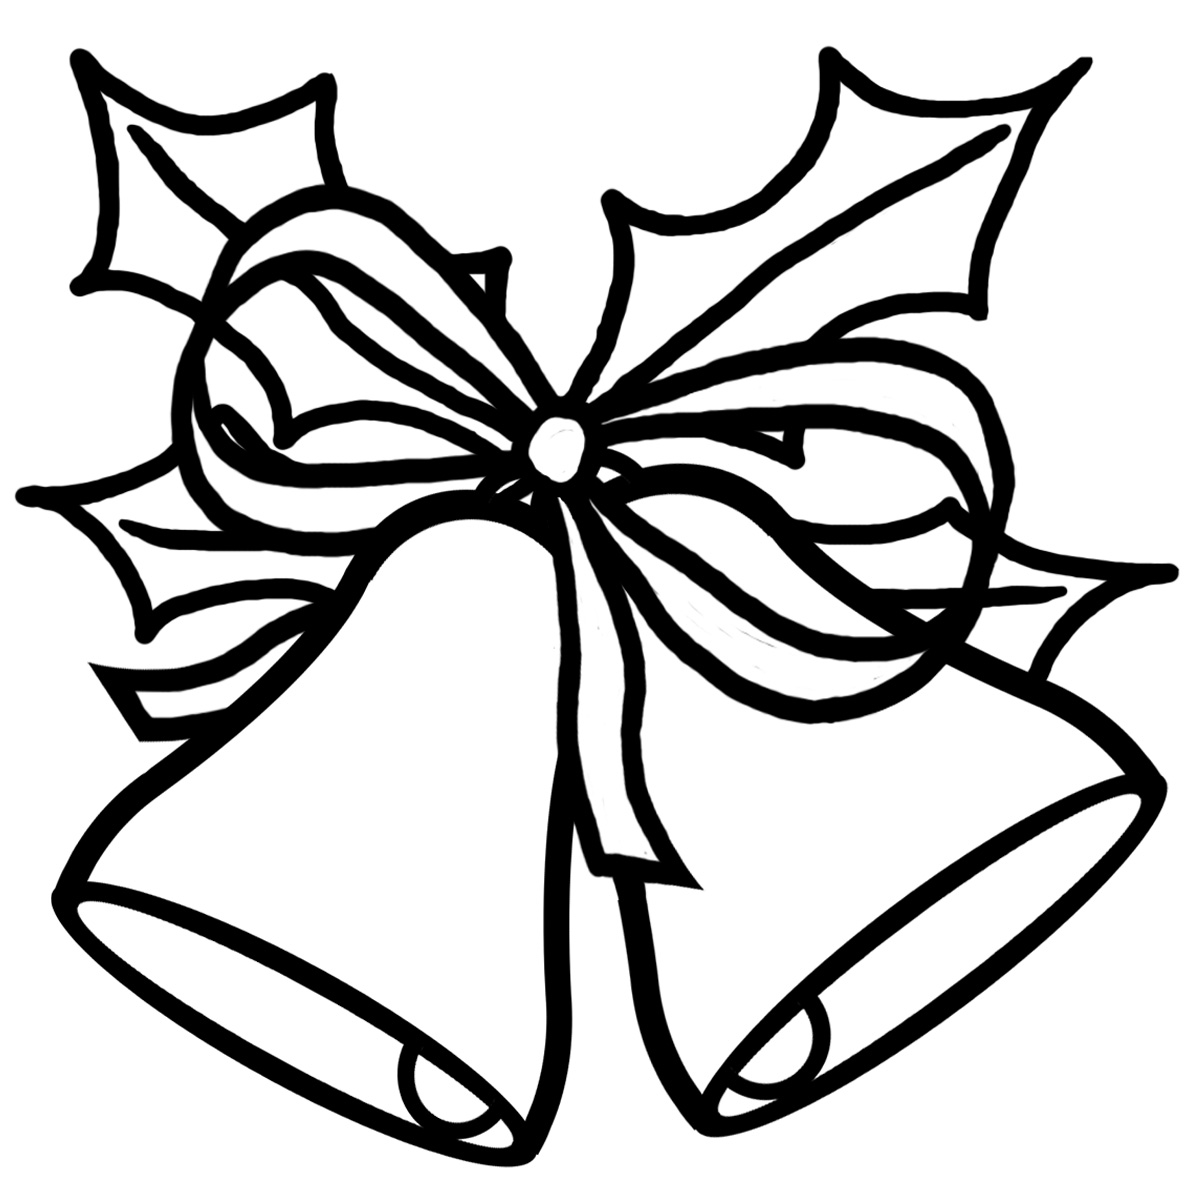 Gift Clipart Black And White Christmas Gift Clip Art Black And White